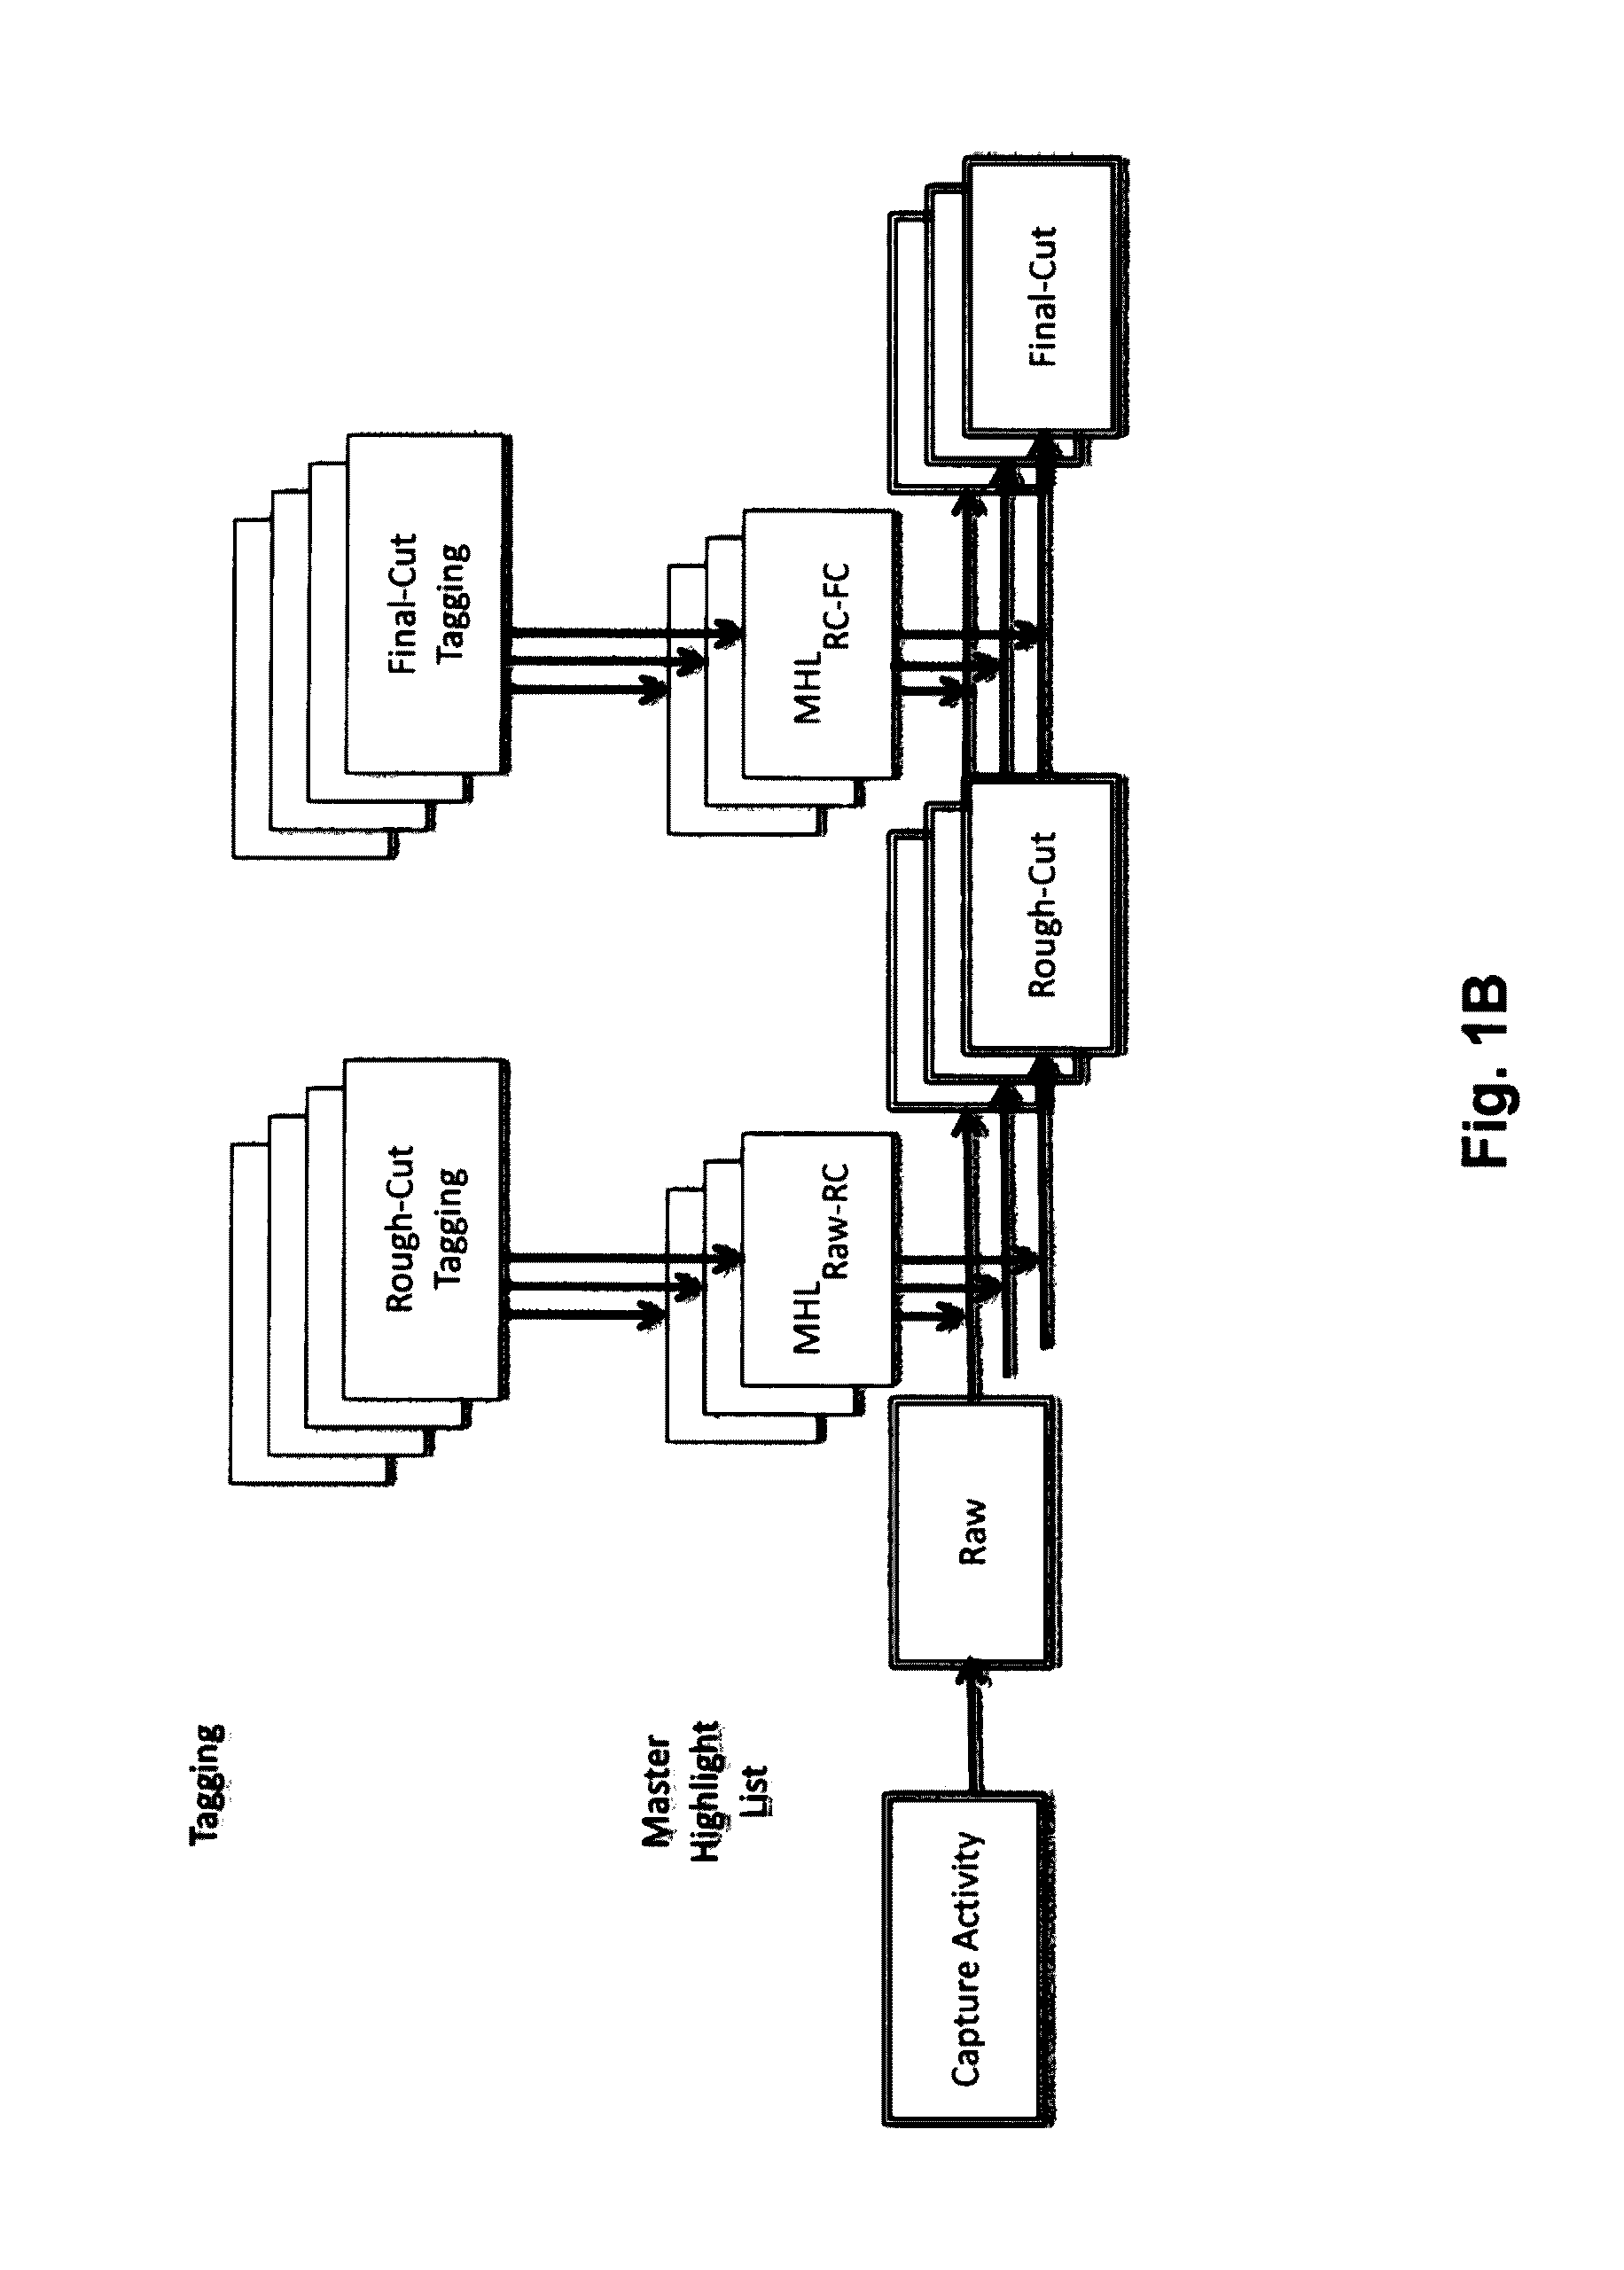 Apparatus for processing captured video data based on capture device orientation